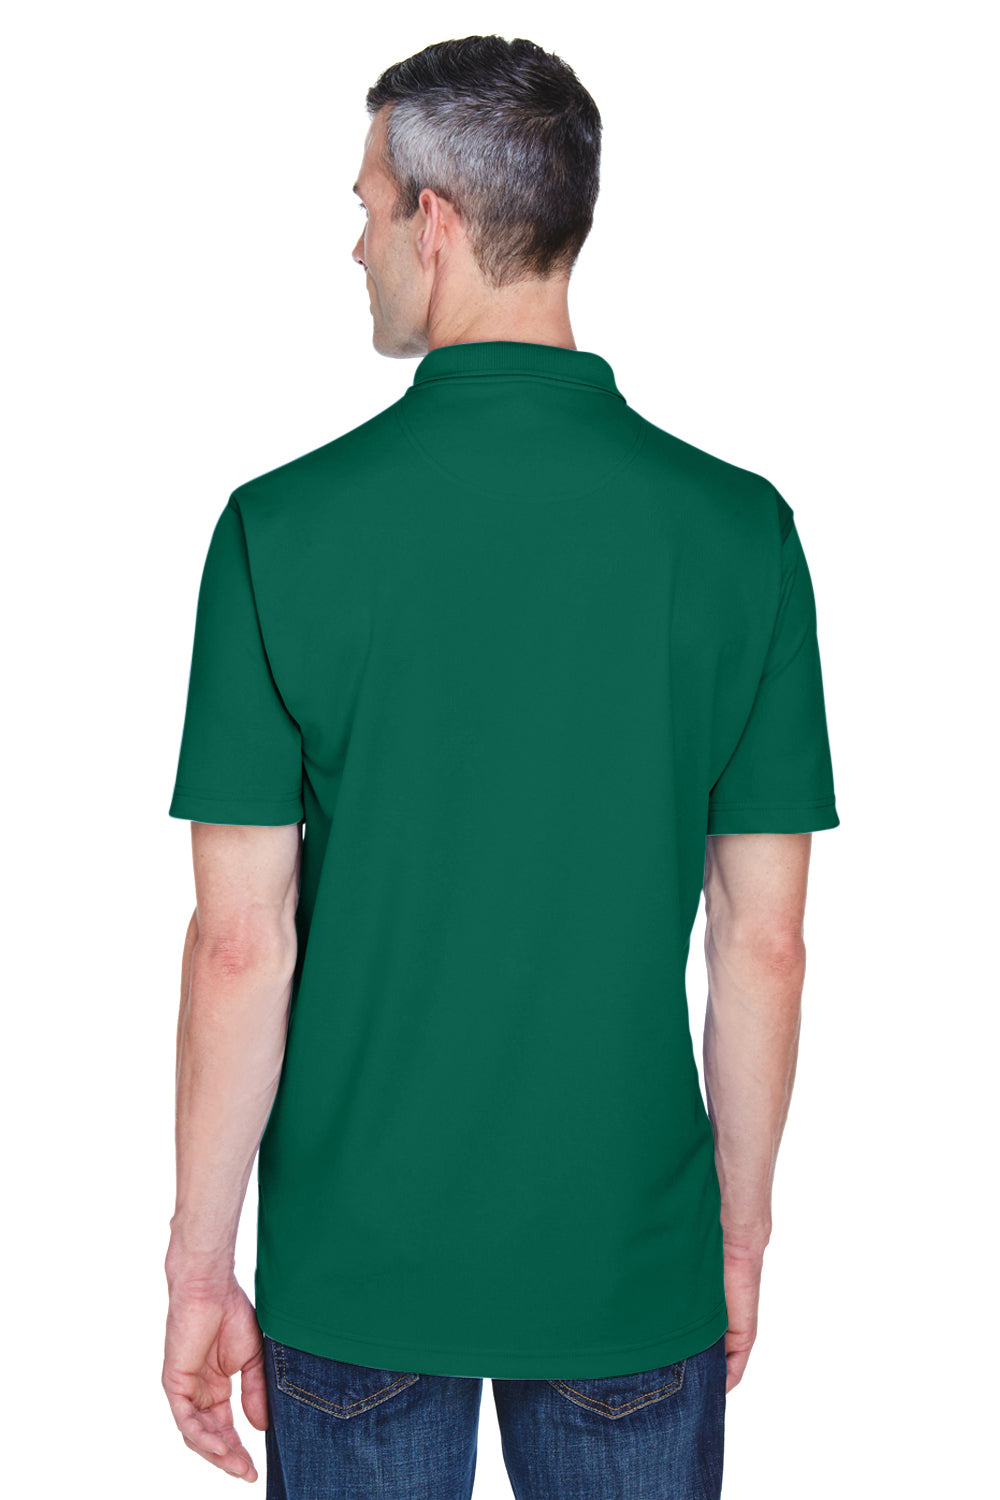 UltraClub 8445 Mens Cool & Dry Performance Moisture Wicking Short Sleeve Polo Shirt Forest Green Back